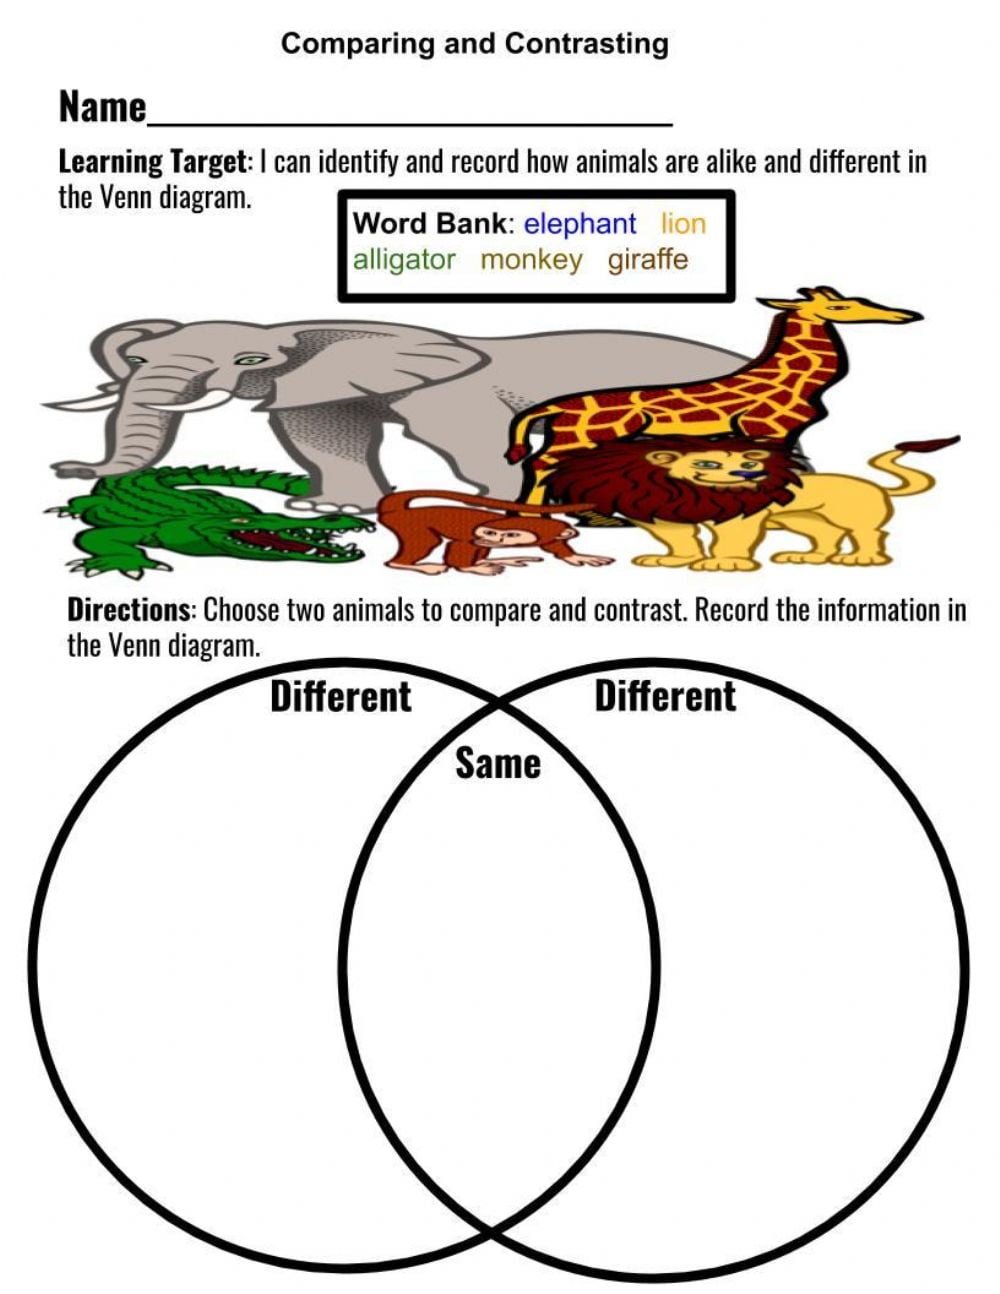 Compare animals. Comparing and contrasting. Compare and contrast Worksheets. Comparing and contrasting Worksheet. Comparing animals Worksheets.